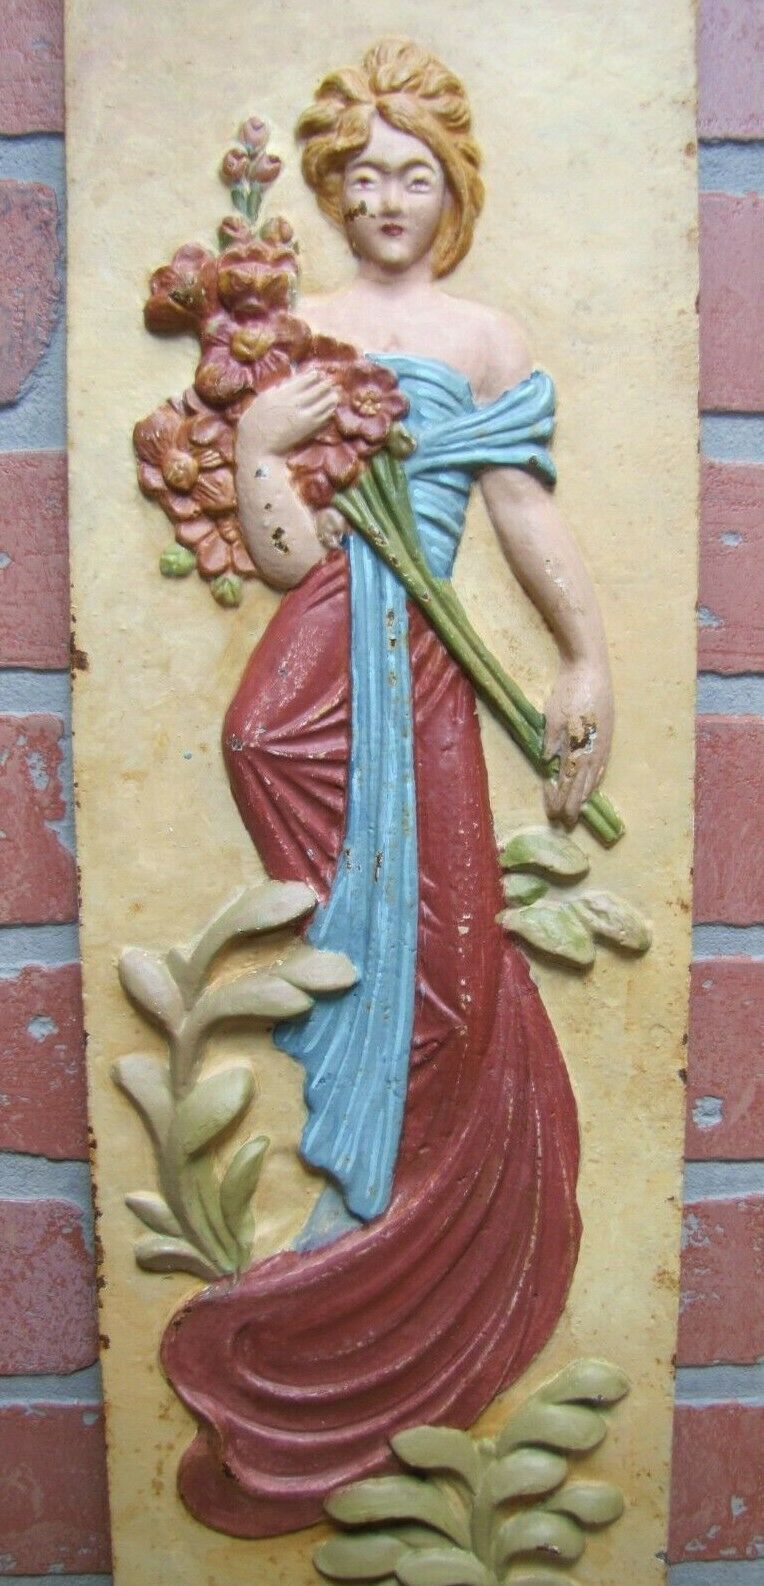 Maiden in Gown Holding Bouquet of Roses Decorative Arts Cast Iron Plaque